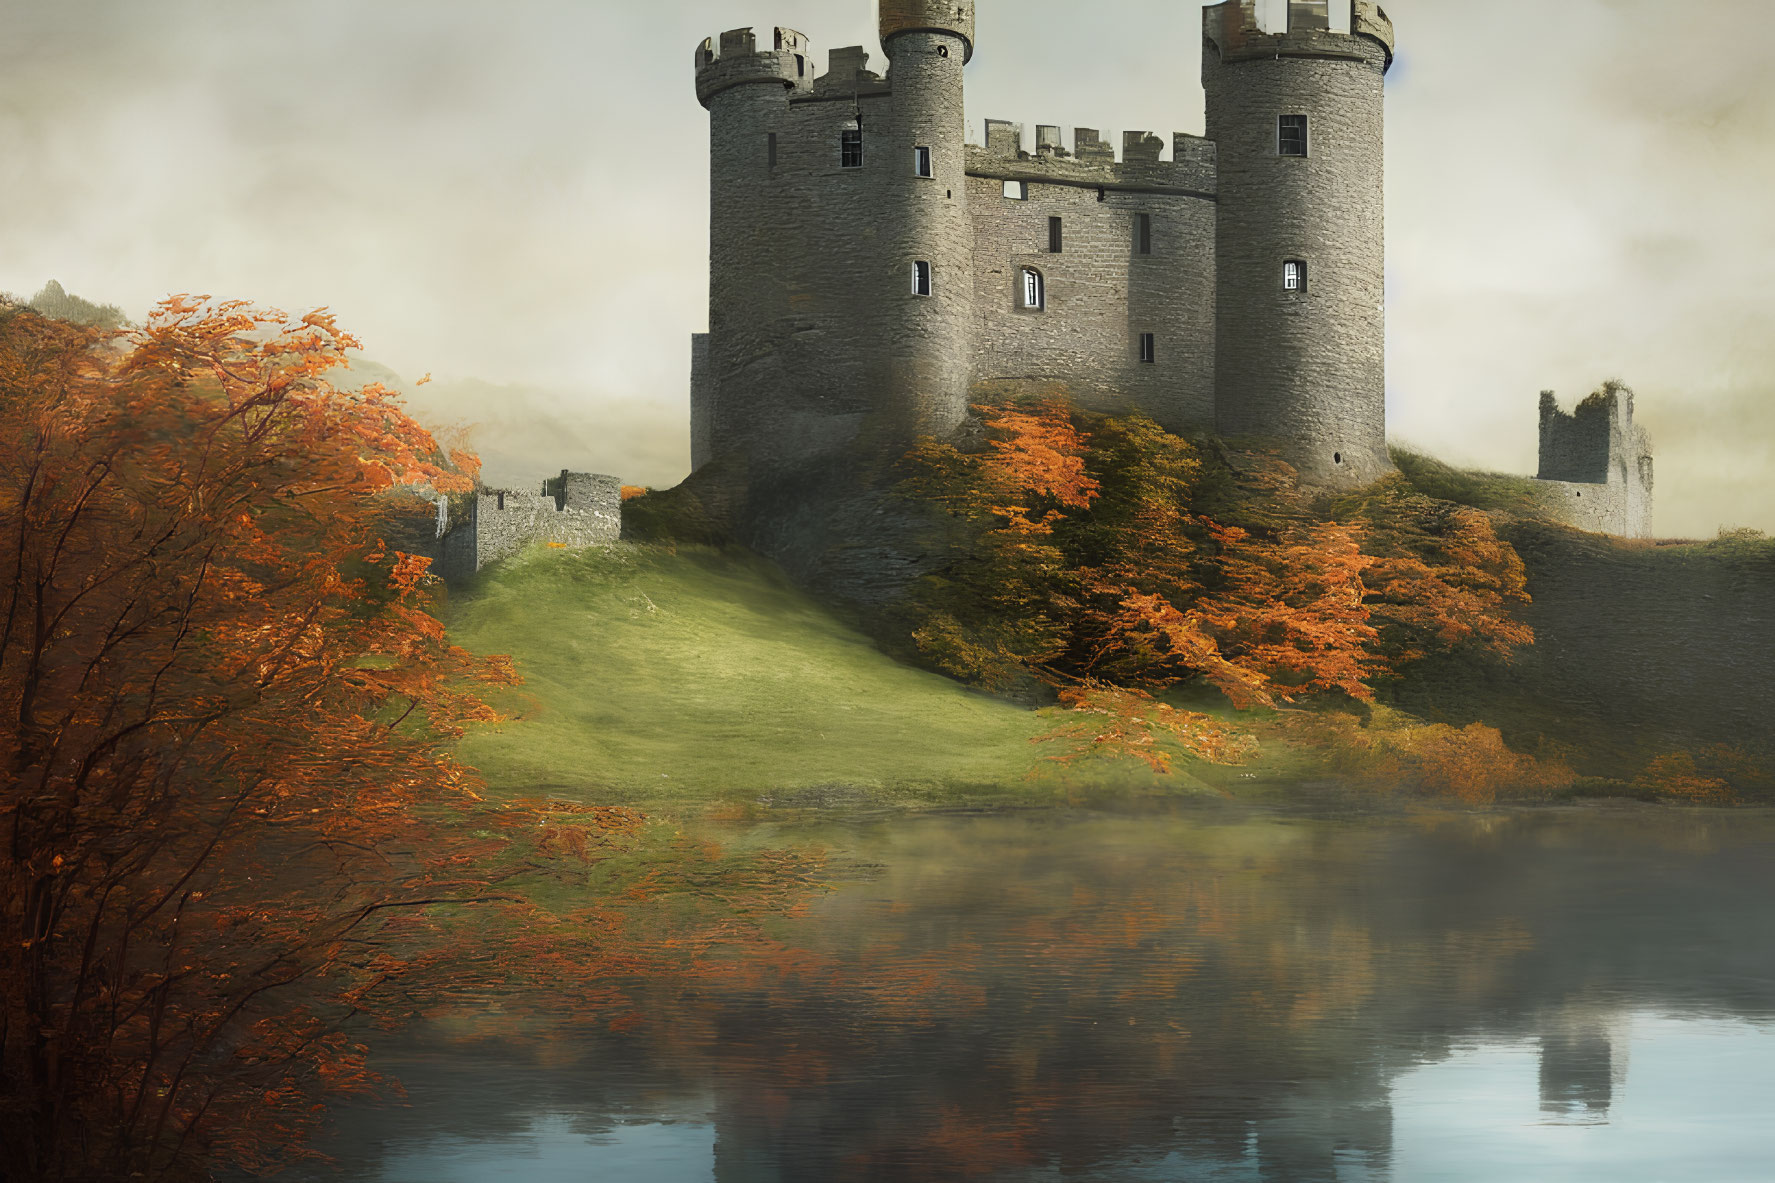 Stone castle with towers overlooking tranquil lake and autumn trees under golden sky